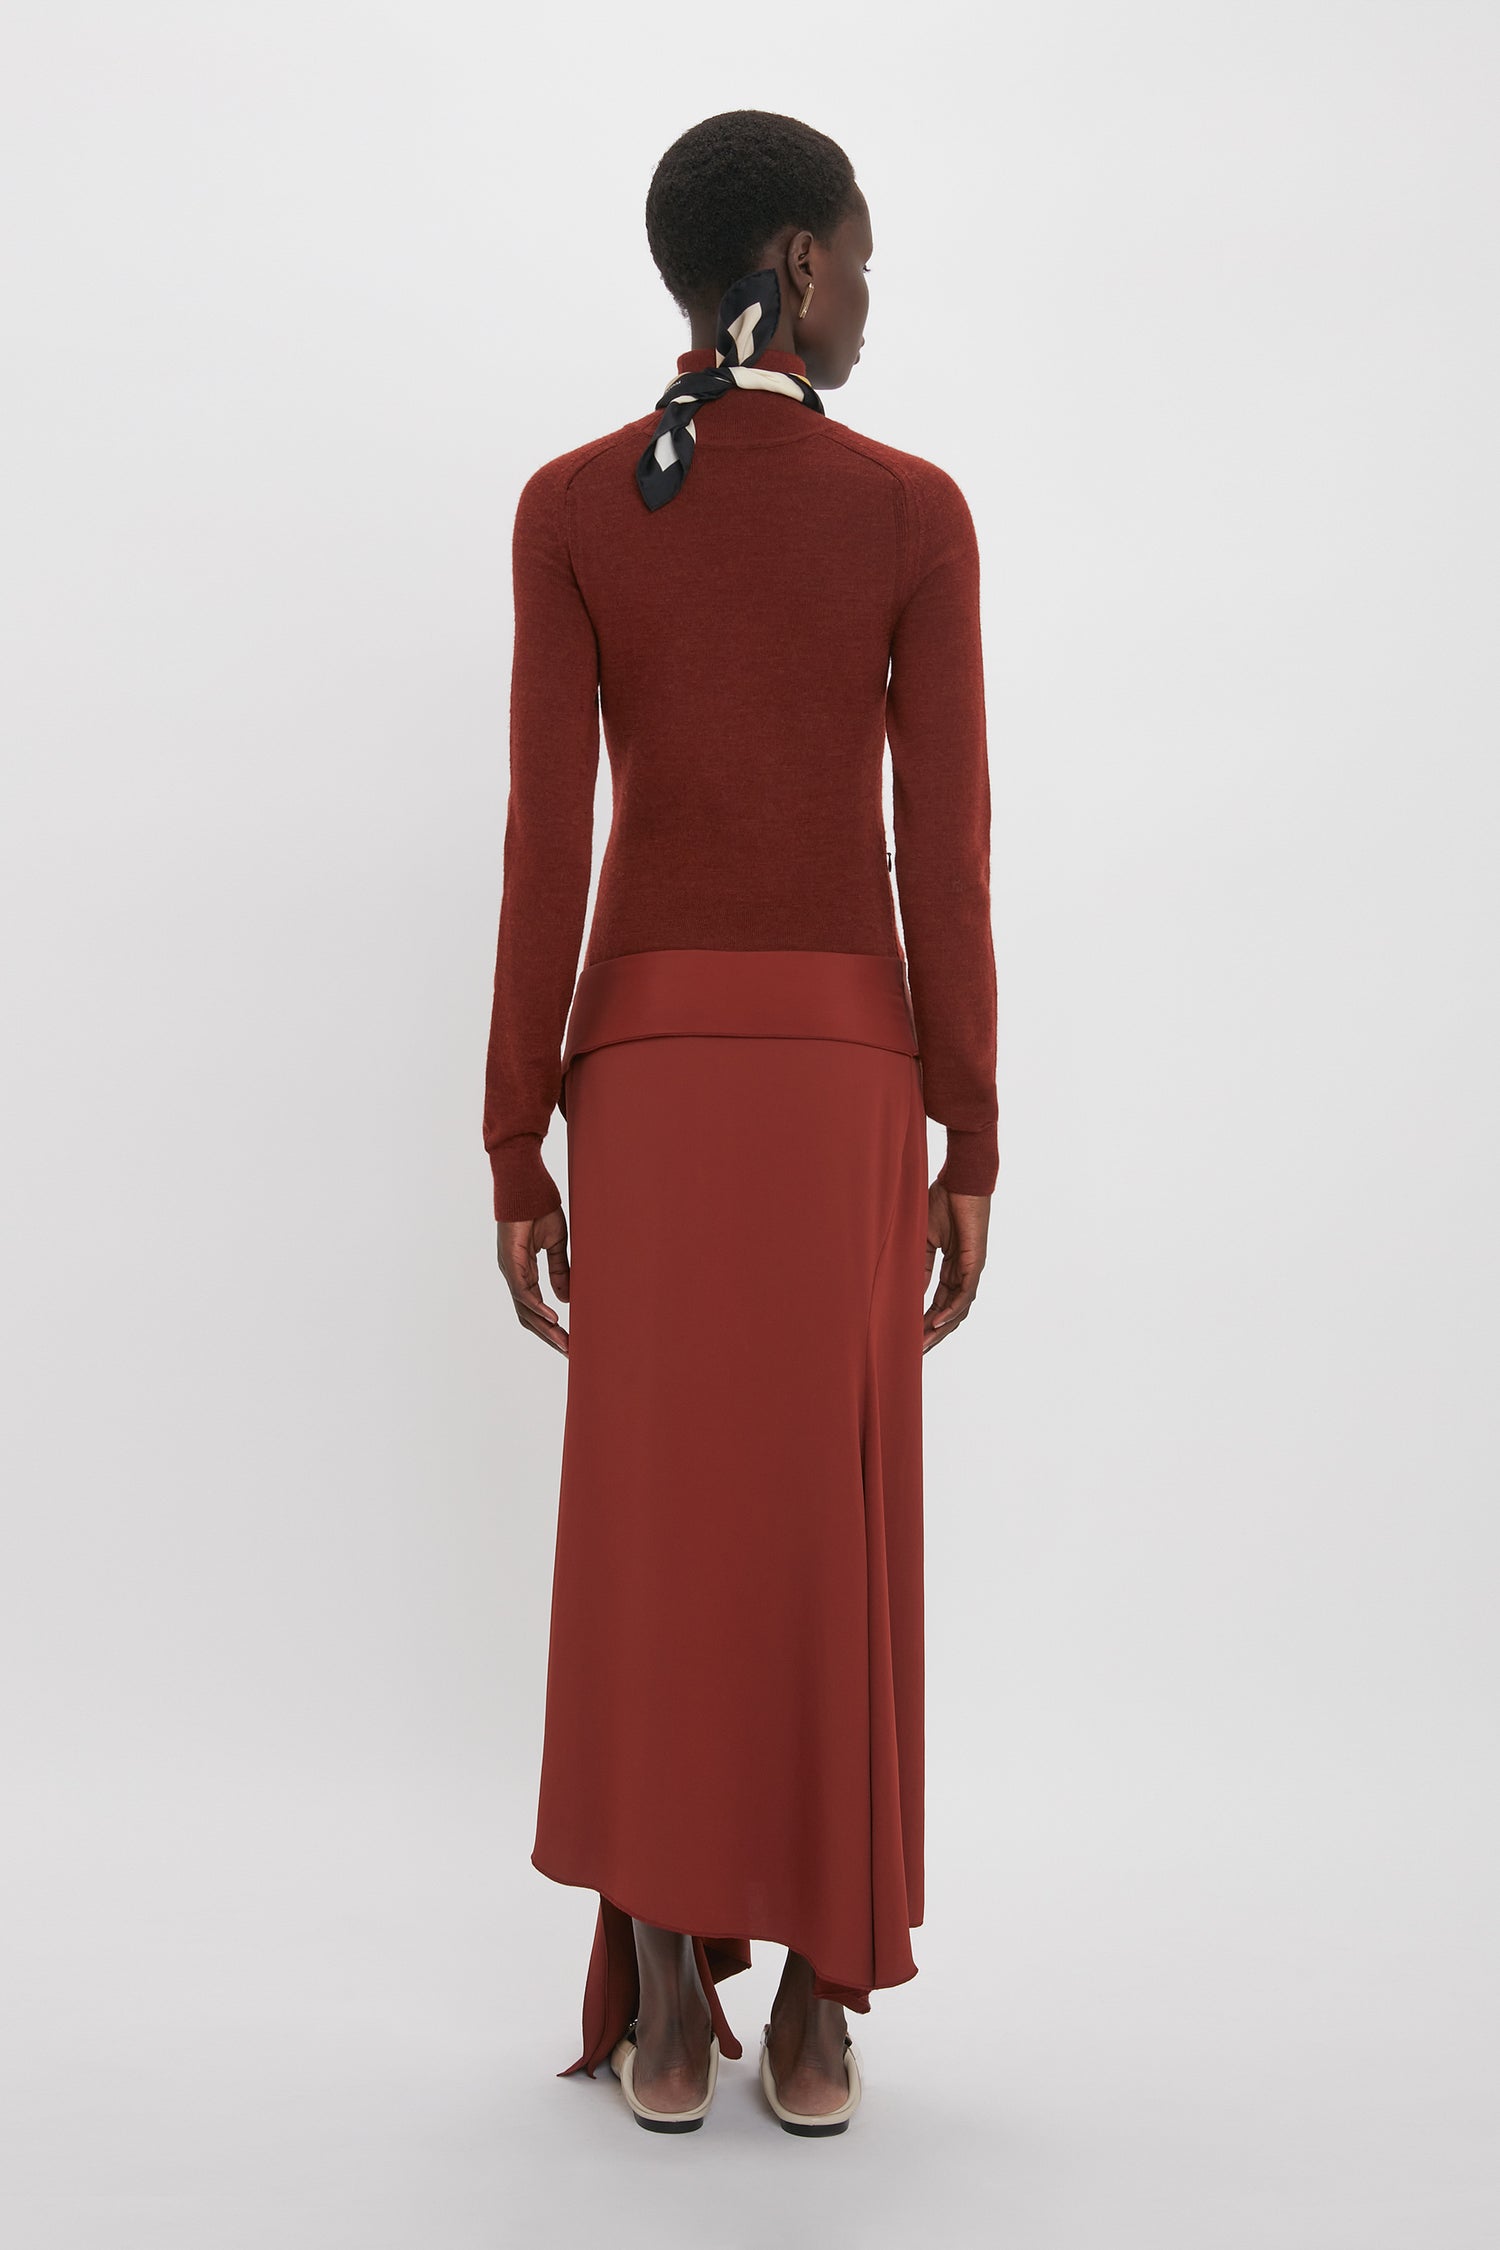 Person with short hair wearing a long-sleeve maroon top and an elegant High Neck Tie Detail Dress In Russet by Victoria Beckham, standing against a plain white background, viewed from the back.